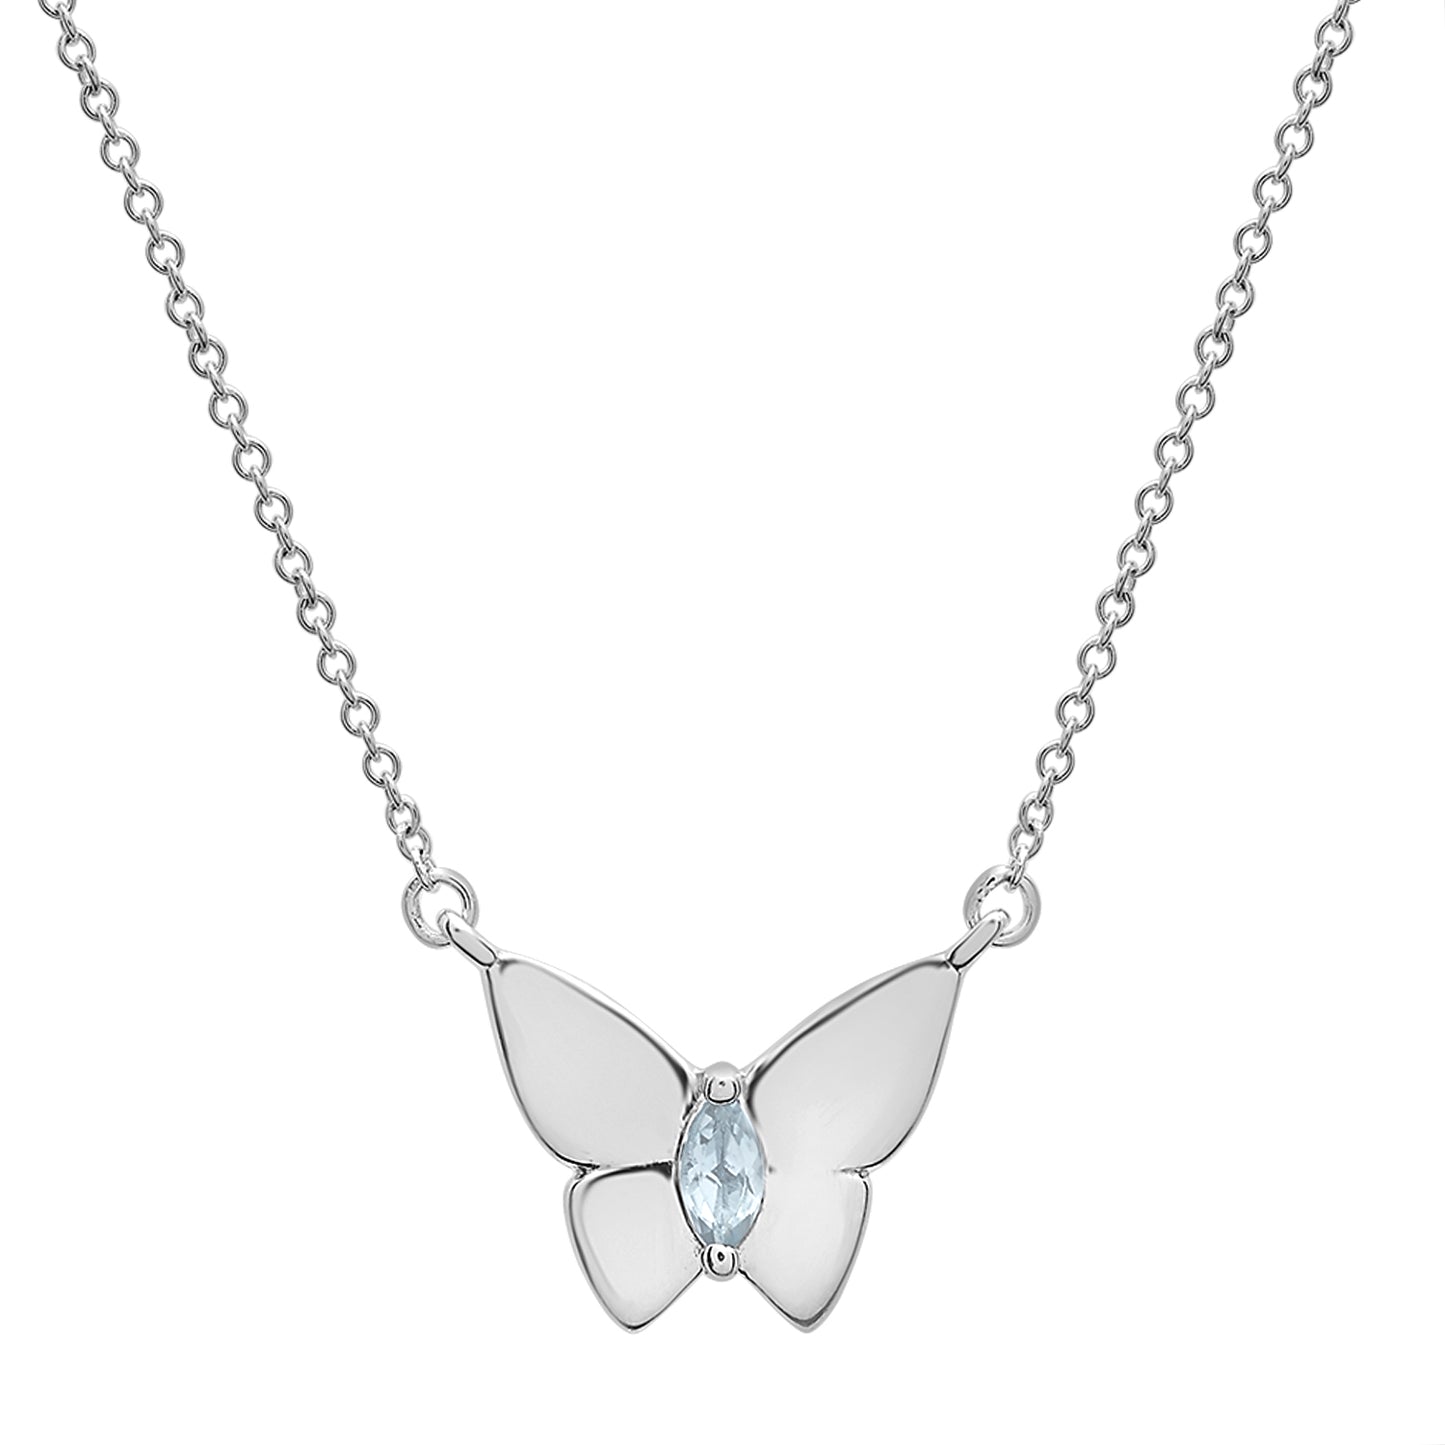 Gray Stone Butterfly Birthstone Necklace with Silver chain